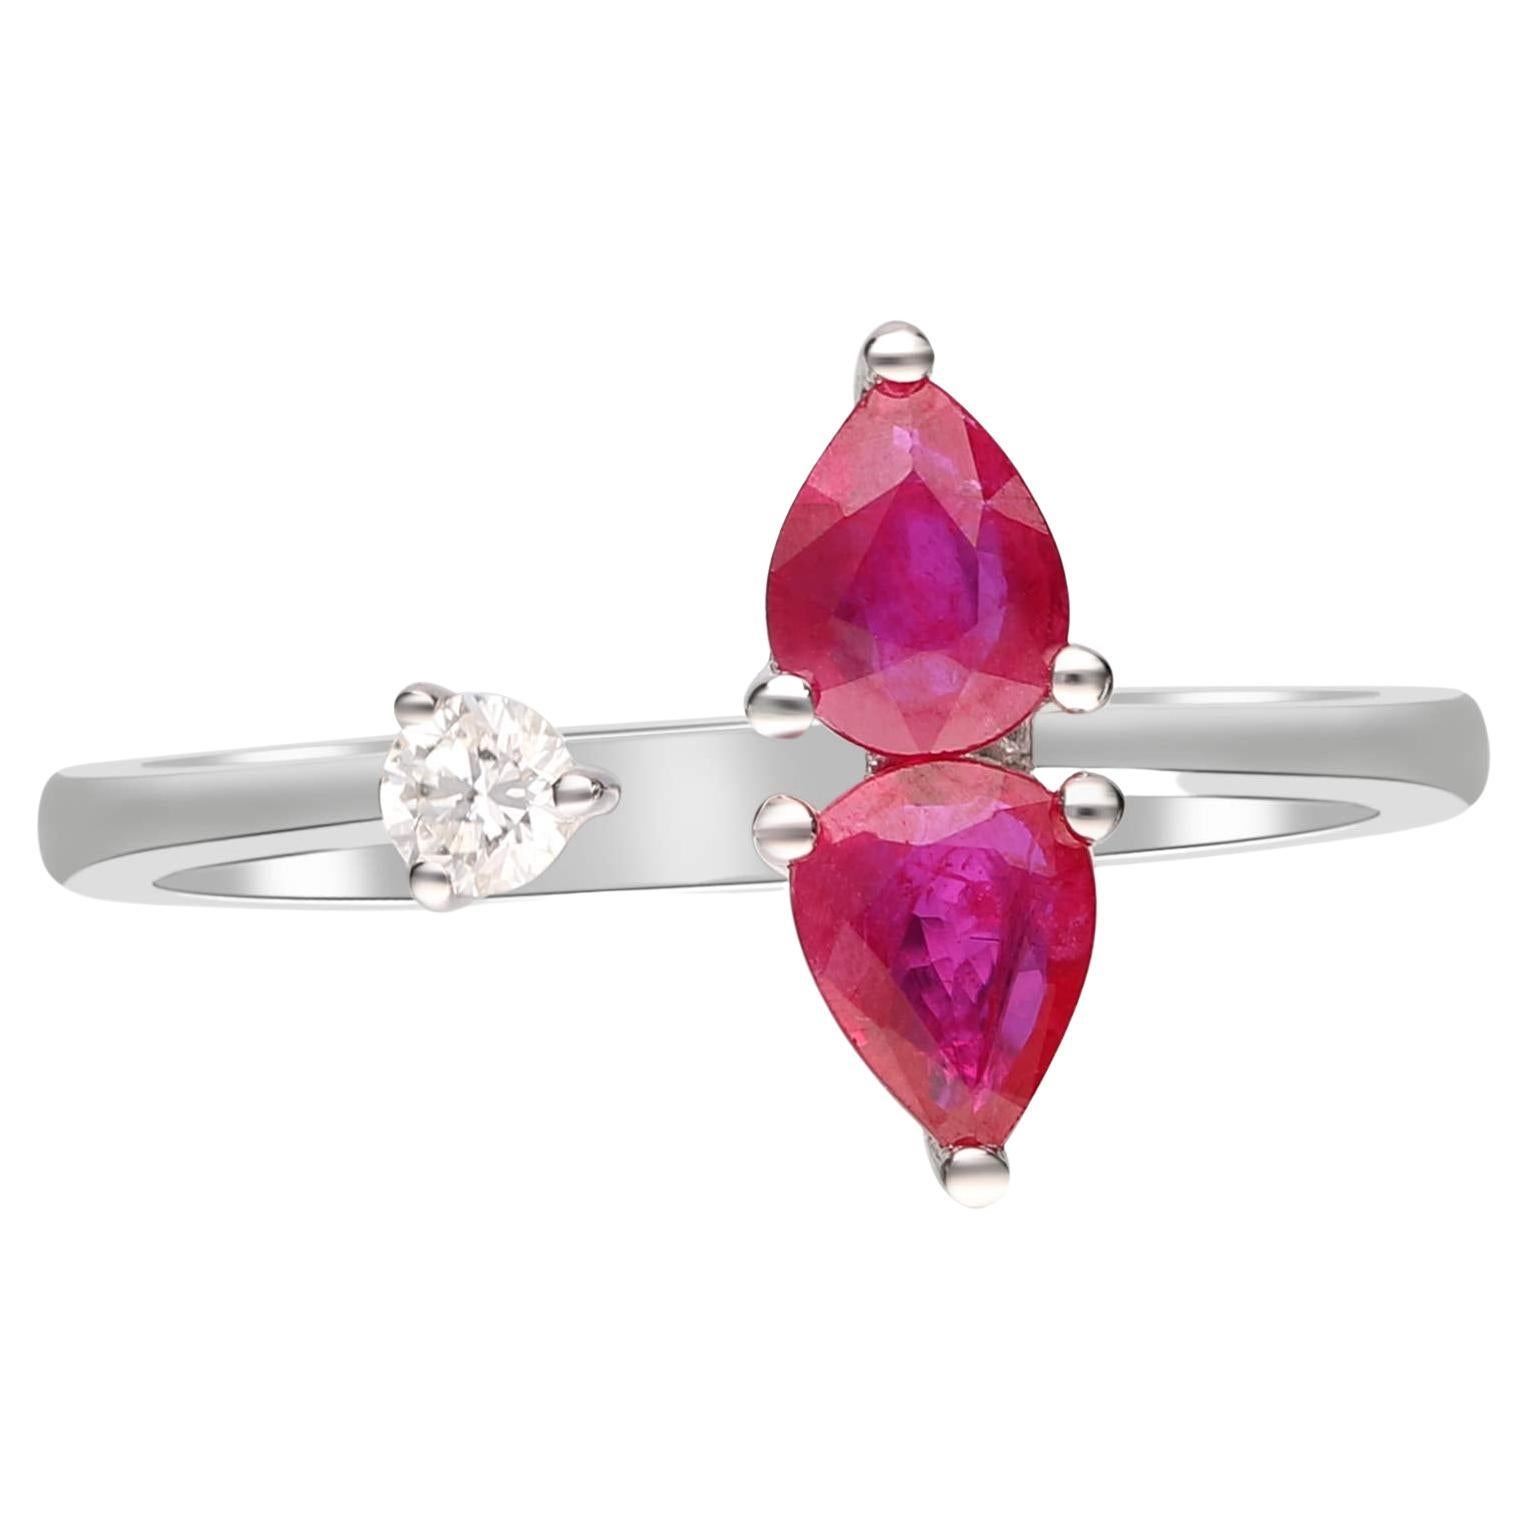 0.68 Carat Pear-Cut Ruby with Diamond Accents 18K White Gold Ring